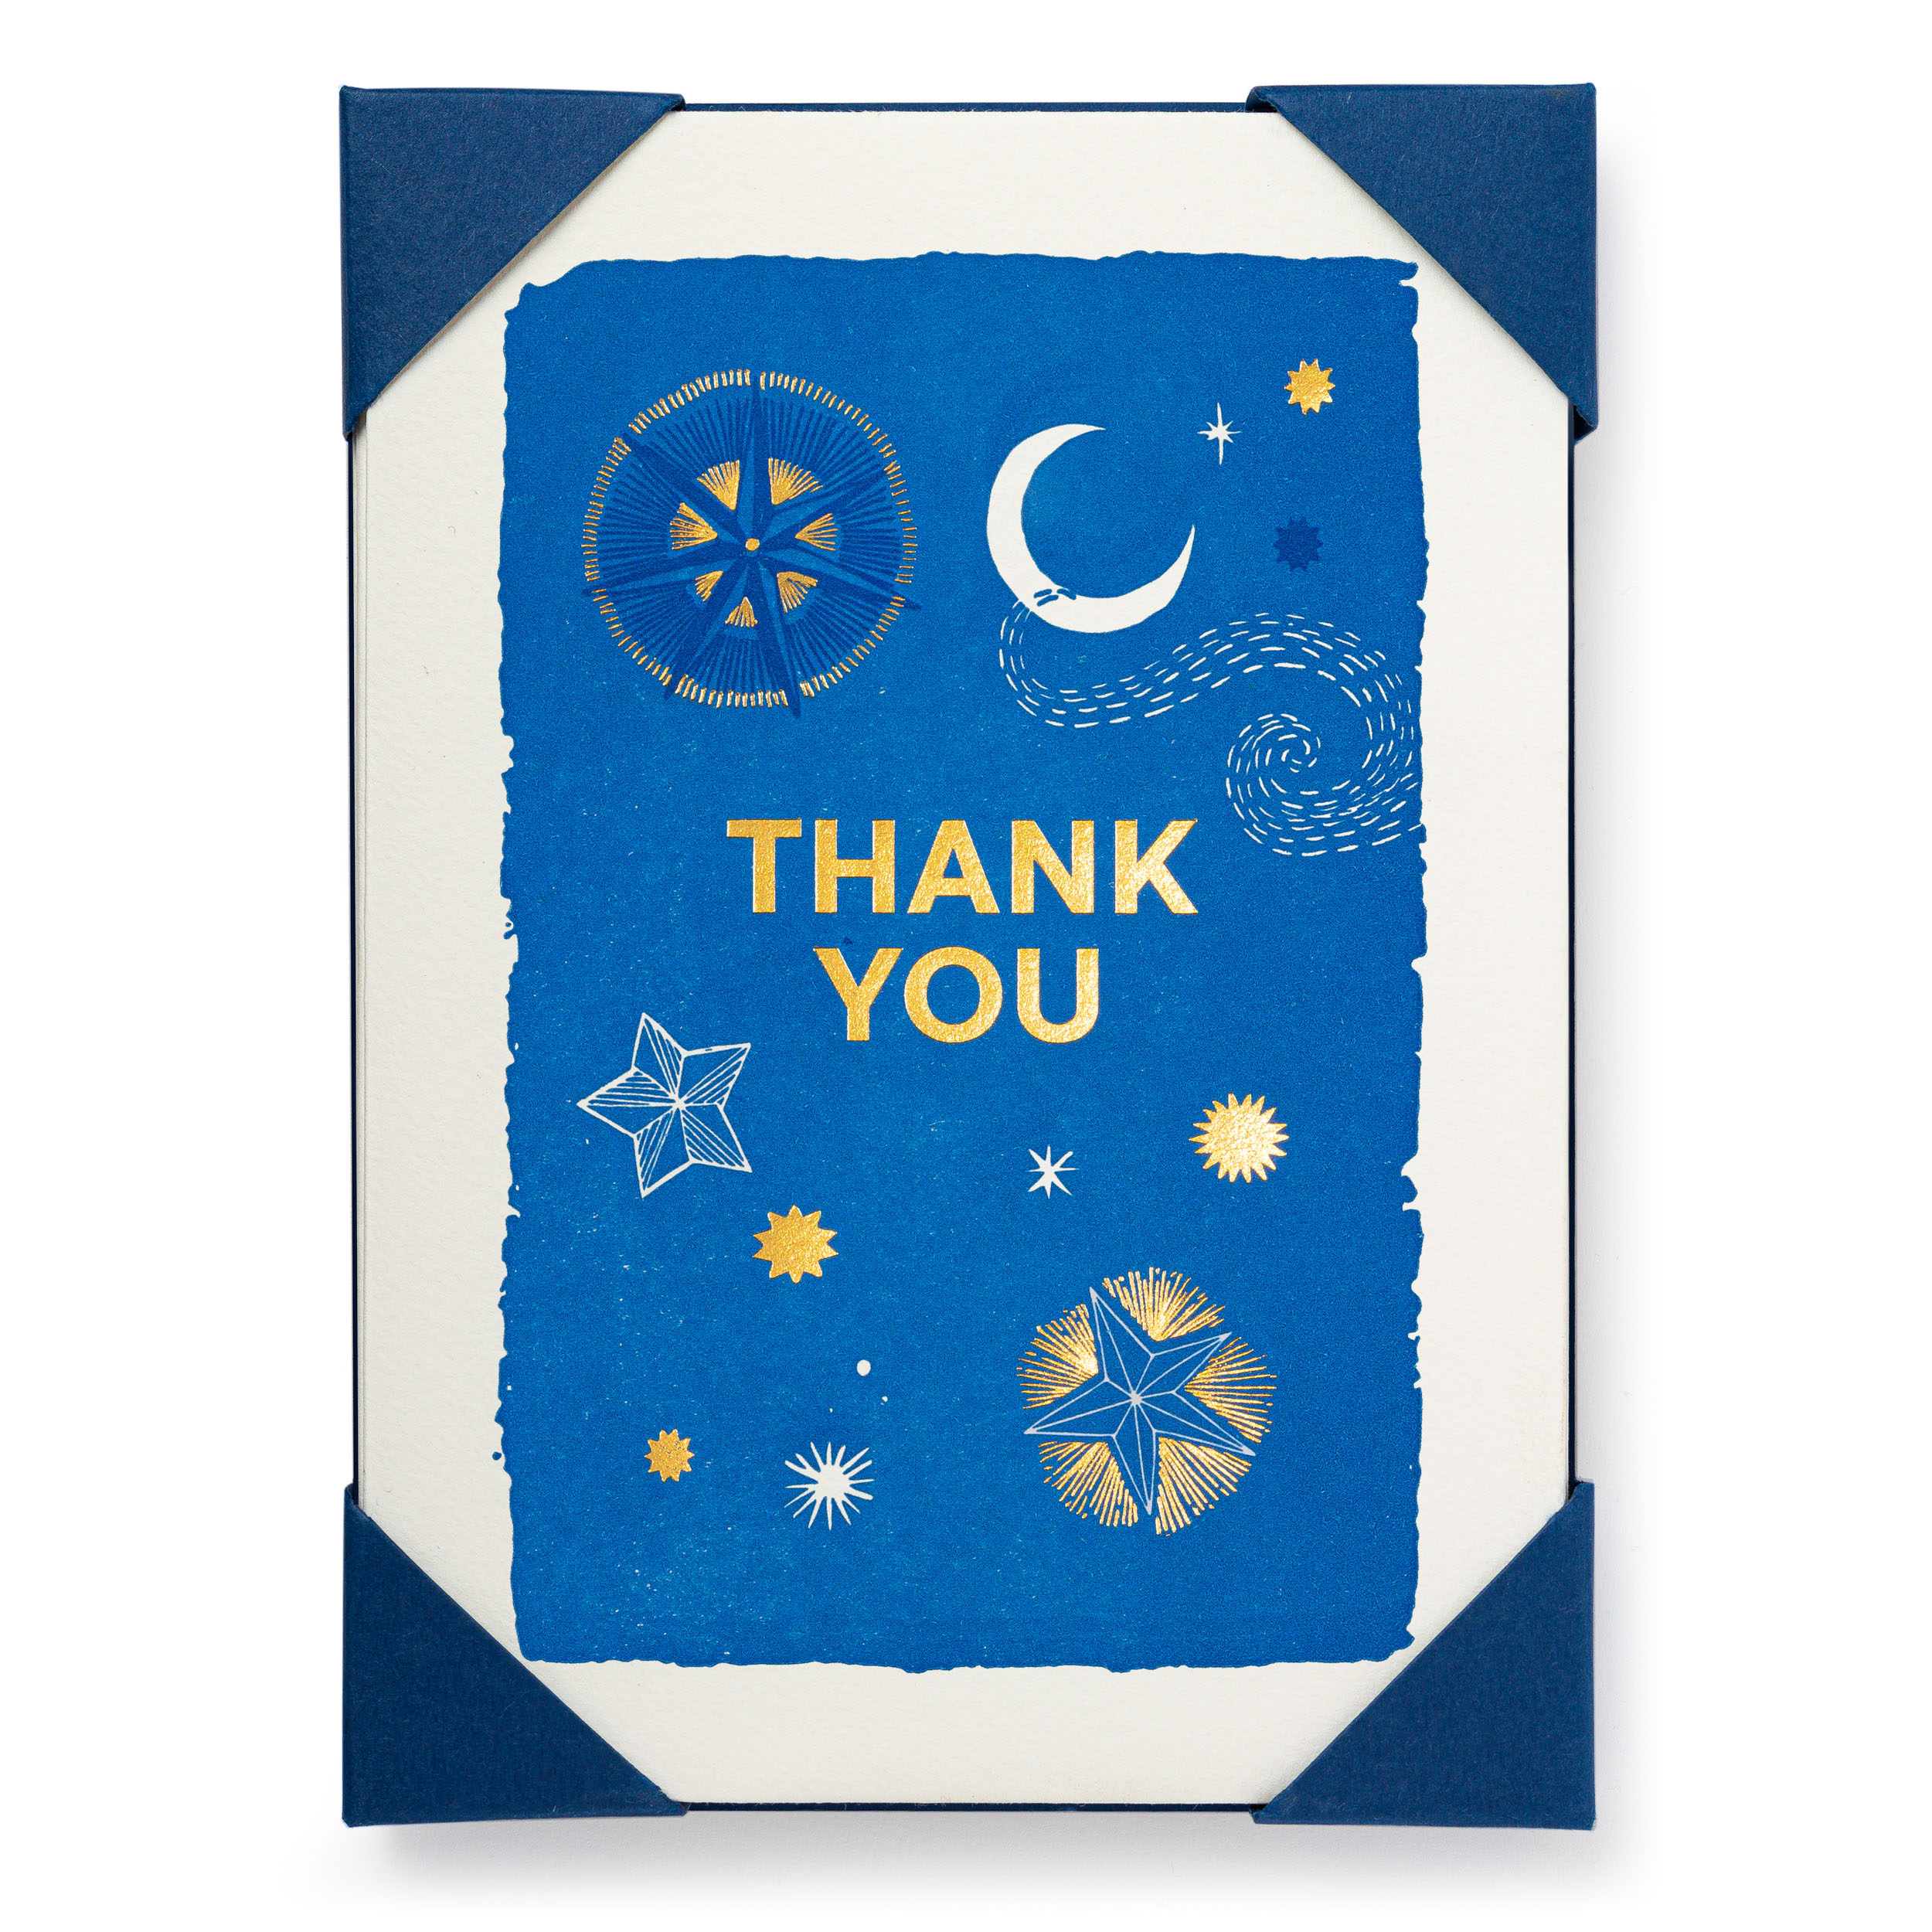 Thank You Stars - Notelets Packs - Ariane Butto - from Archivist Gallery 